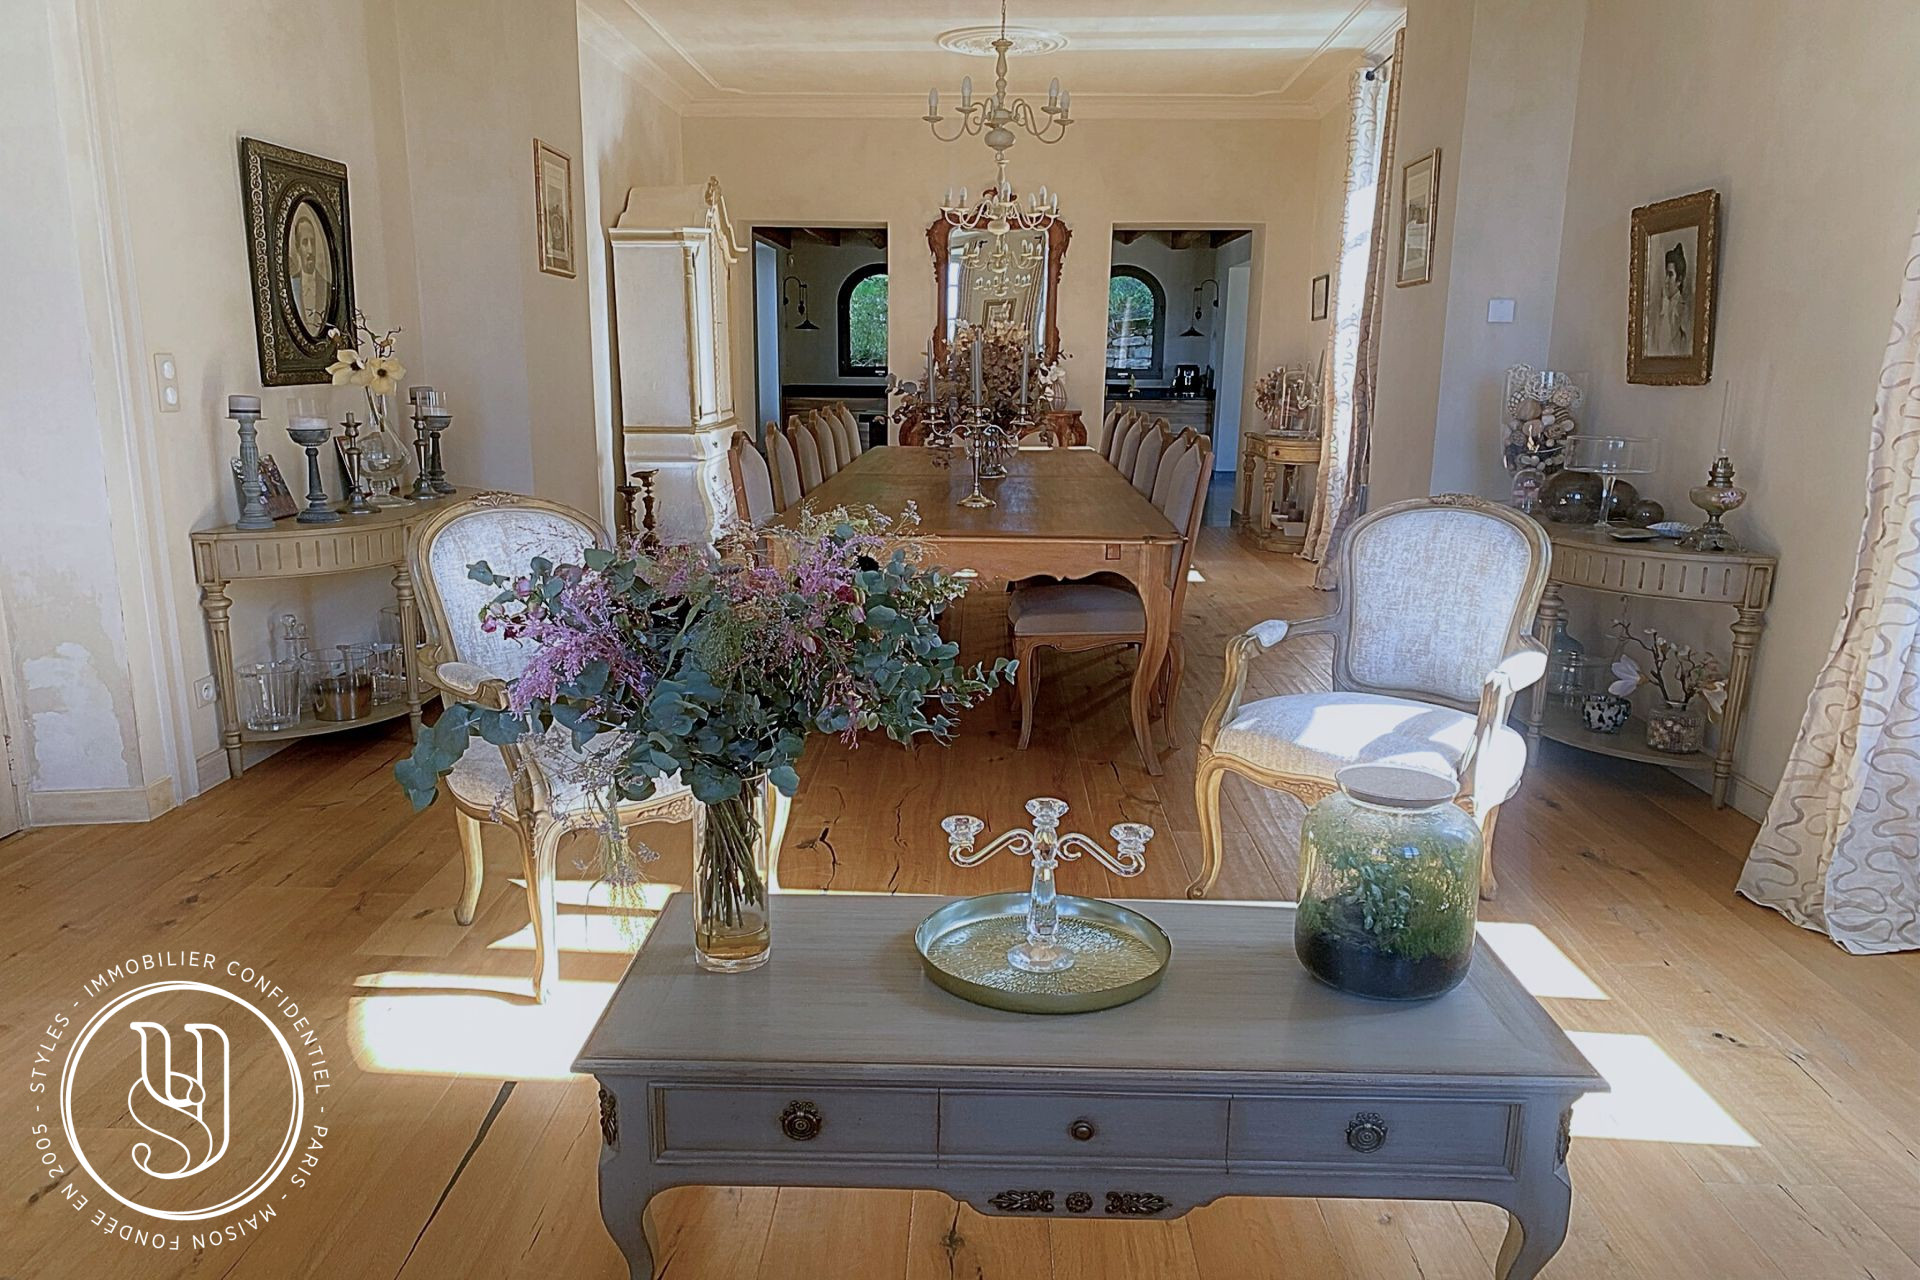 Saint-Rémy-de-Provence - nearby, a superb country house with a preserved character - image 4